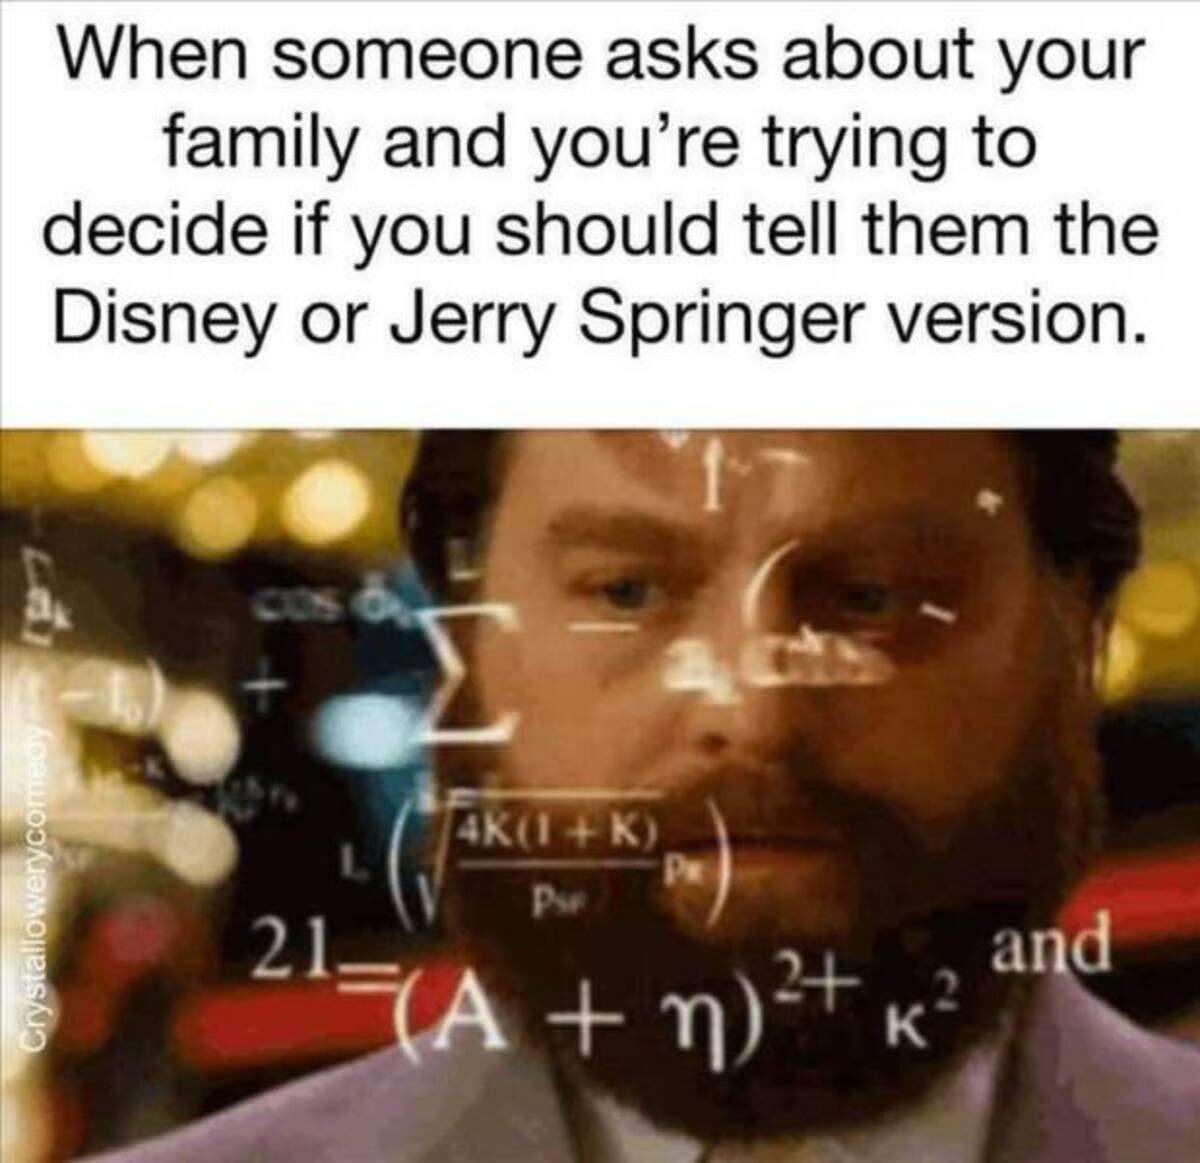 someone asks about your family and you re trying to decide if you should tell them the disney or jerry springer version - Crystallowerycomedy 97 When someone asks about your family and you're trying to decide if you should tell them the Disney or Jerry Sp